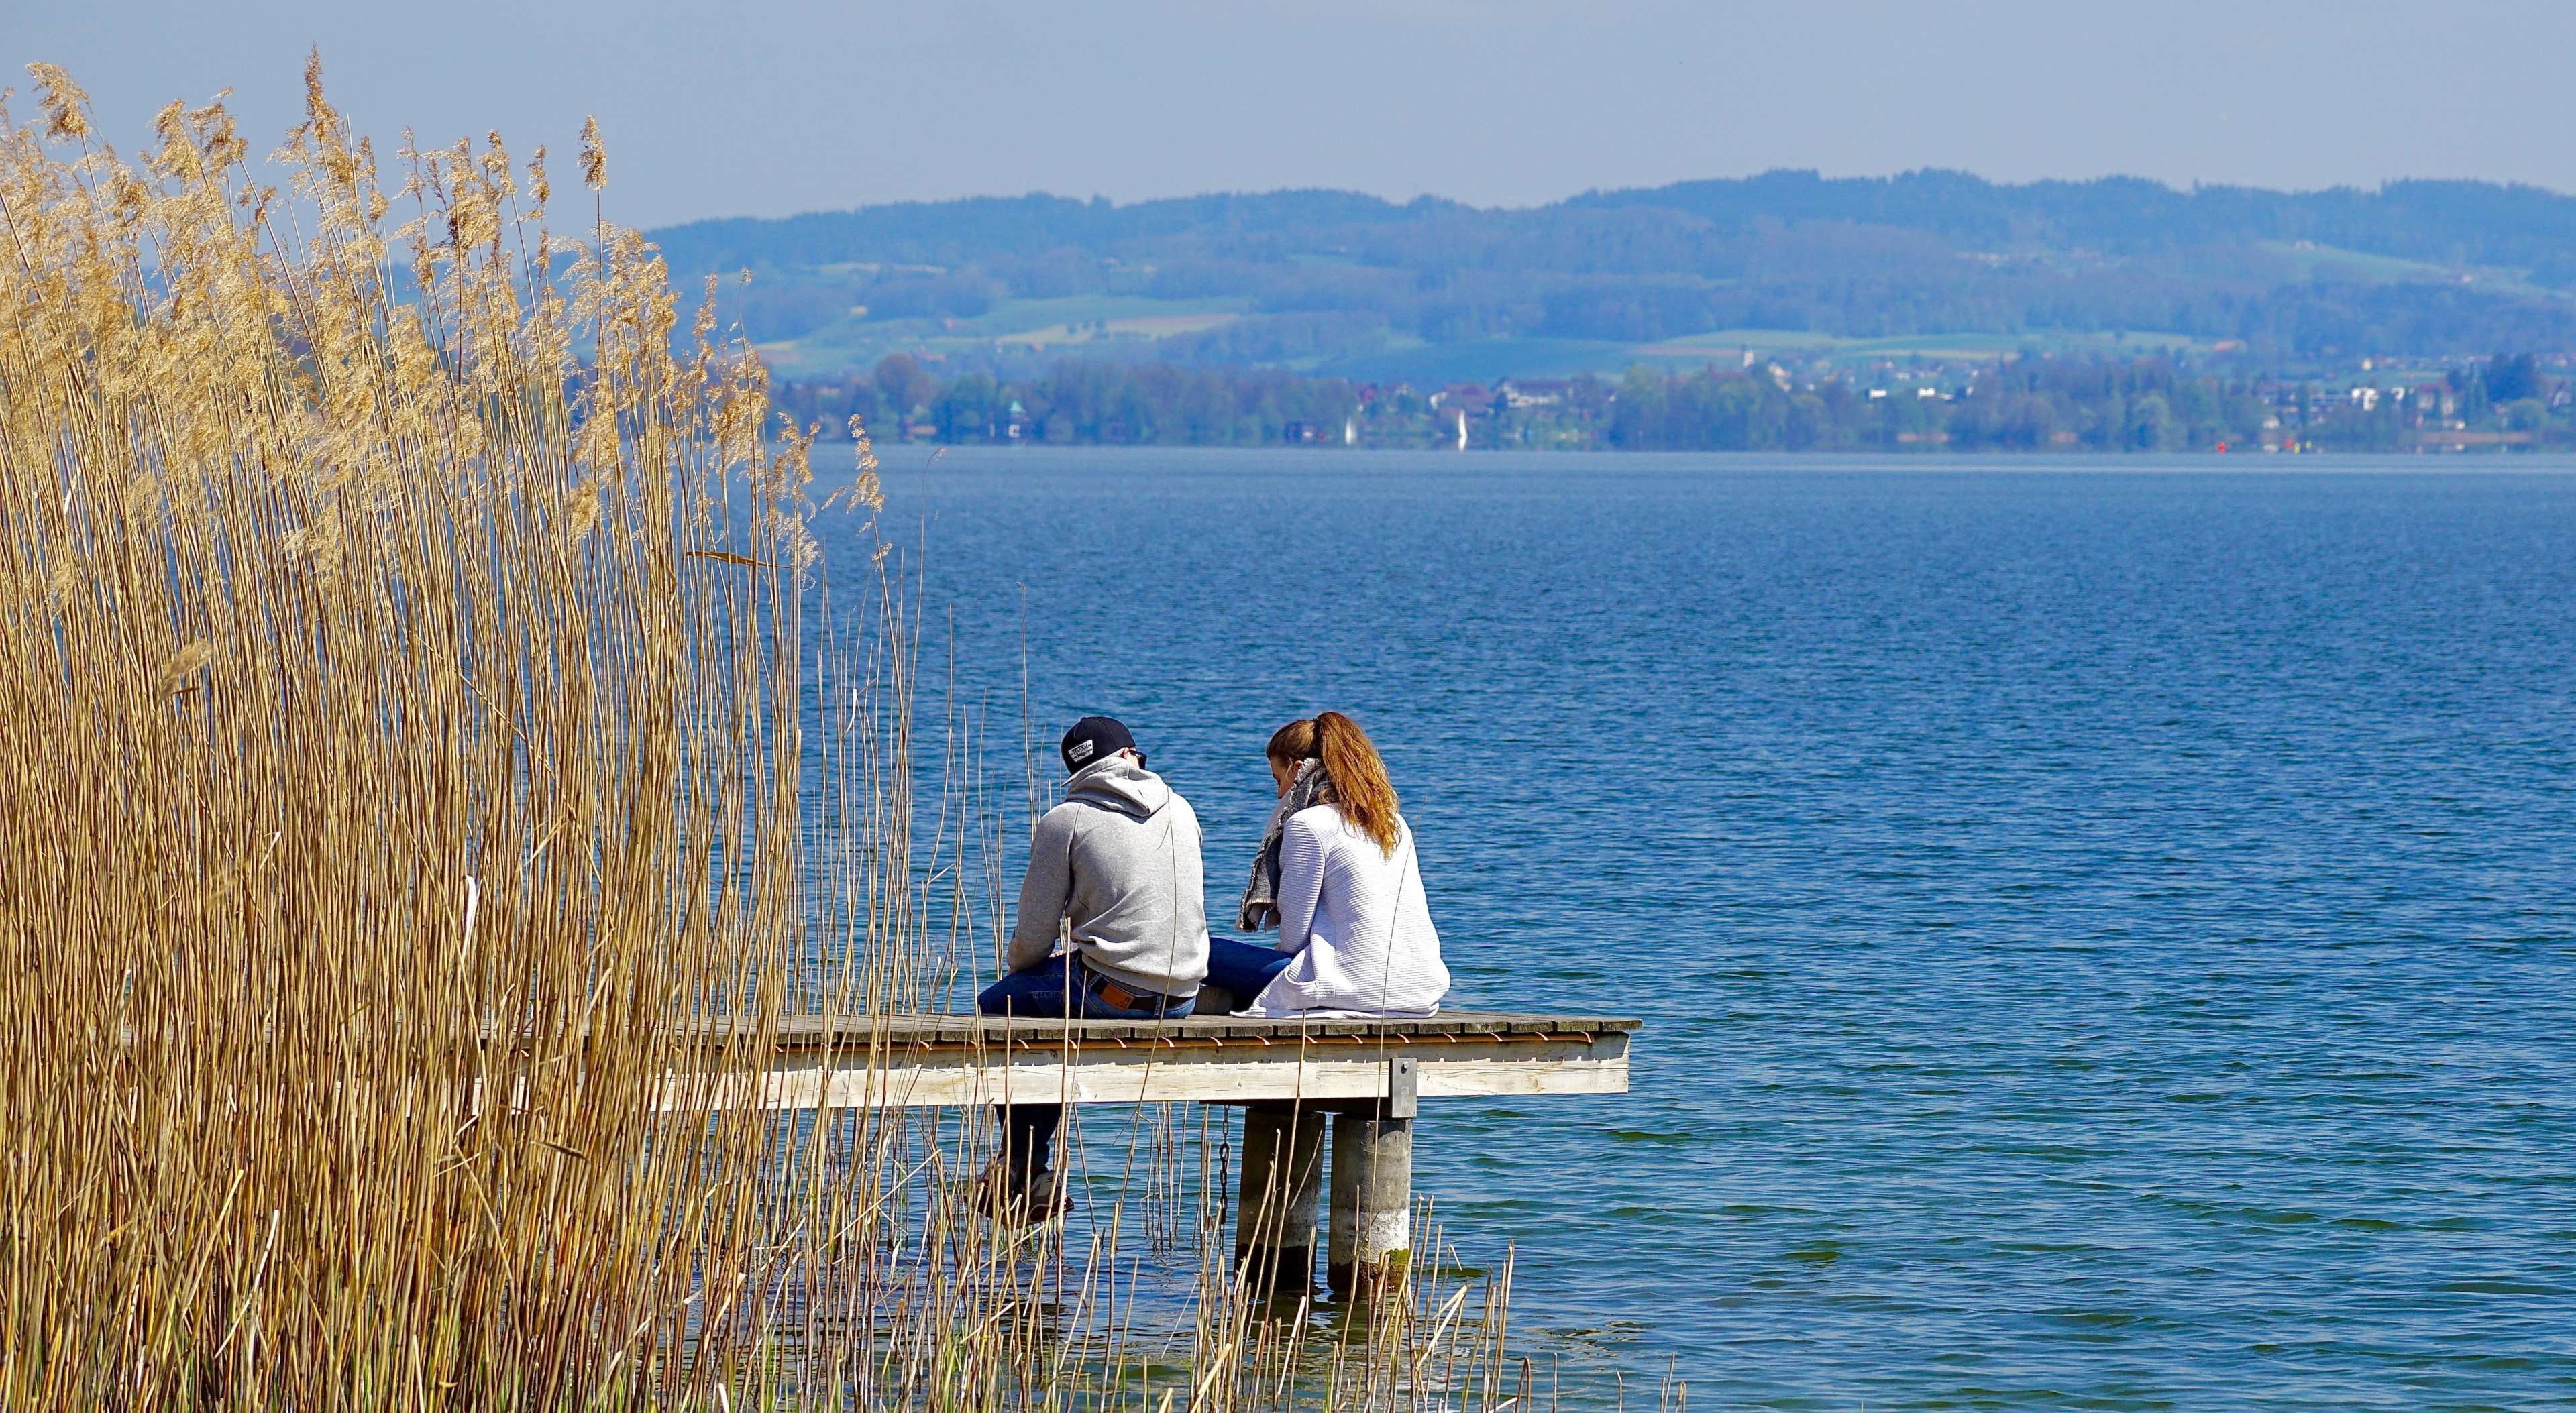 Couple At Peaceful Place - 3840x2107 Wallpaper 